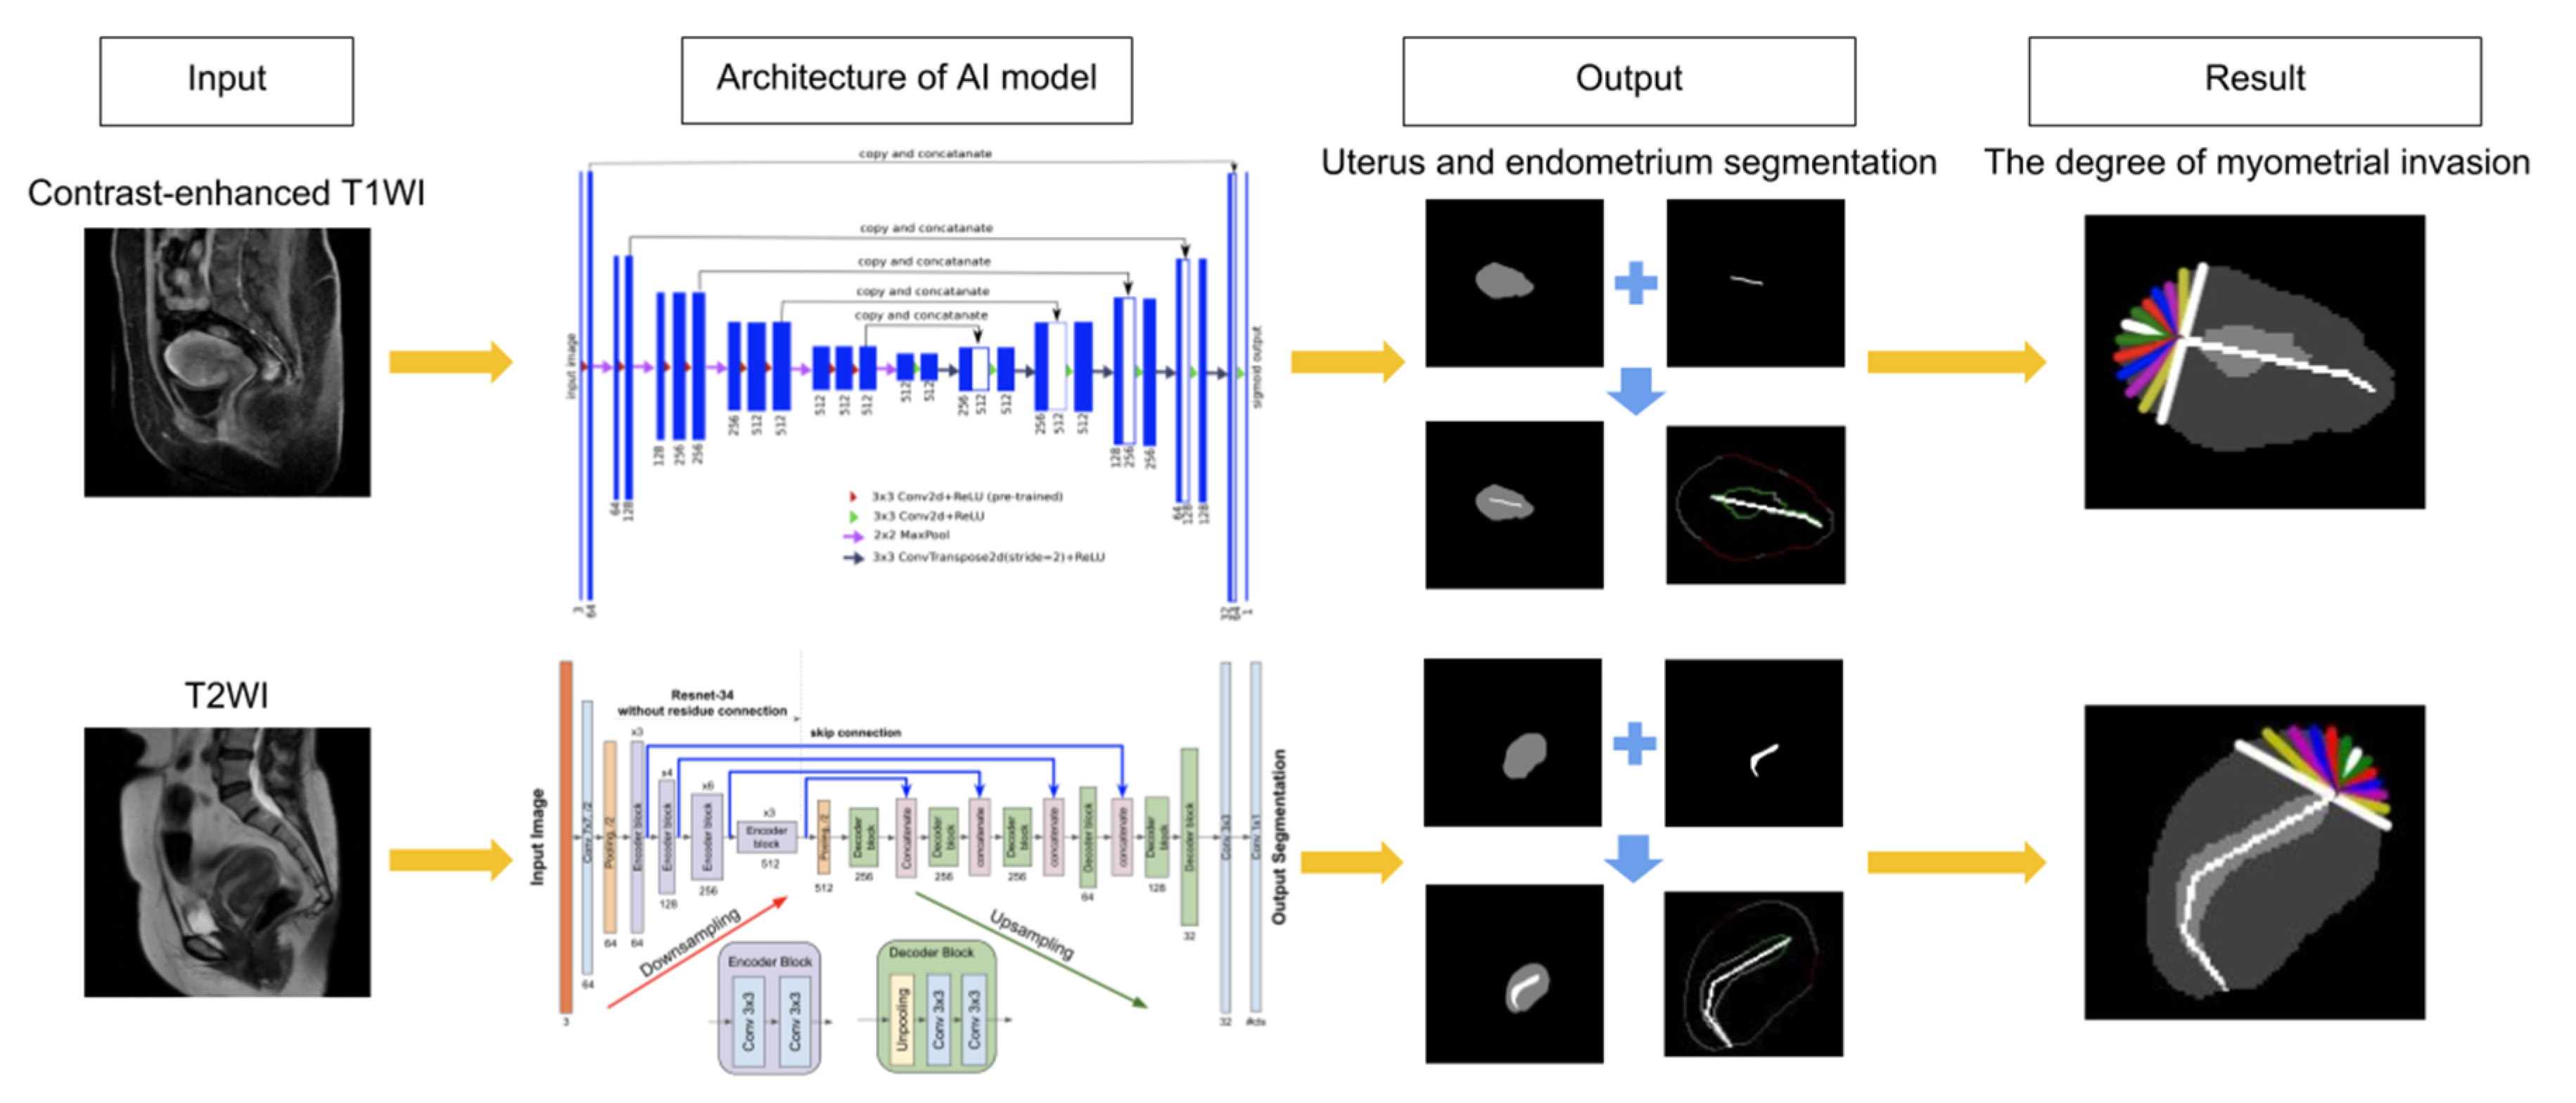 Ijerph Free Full Text Using Deep Learning With Convolutional Neural Network Approach To Identify The Invasion Depth Of Endometrial Cancer In Myometrium Using Mr Images A Pilot Study Html